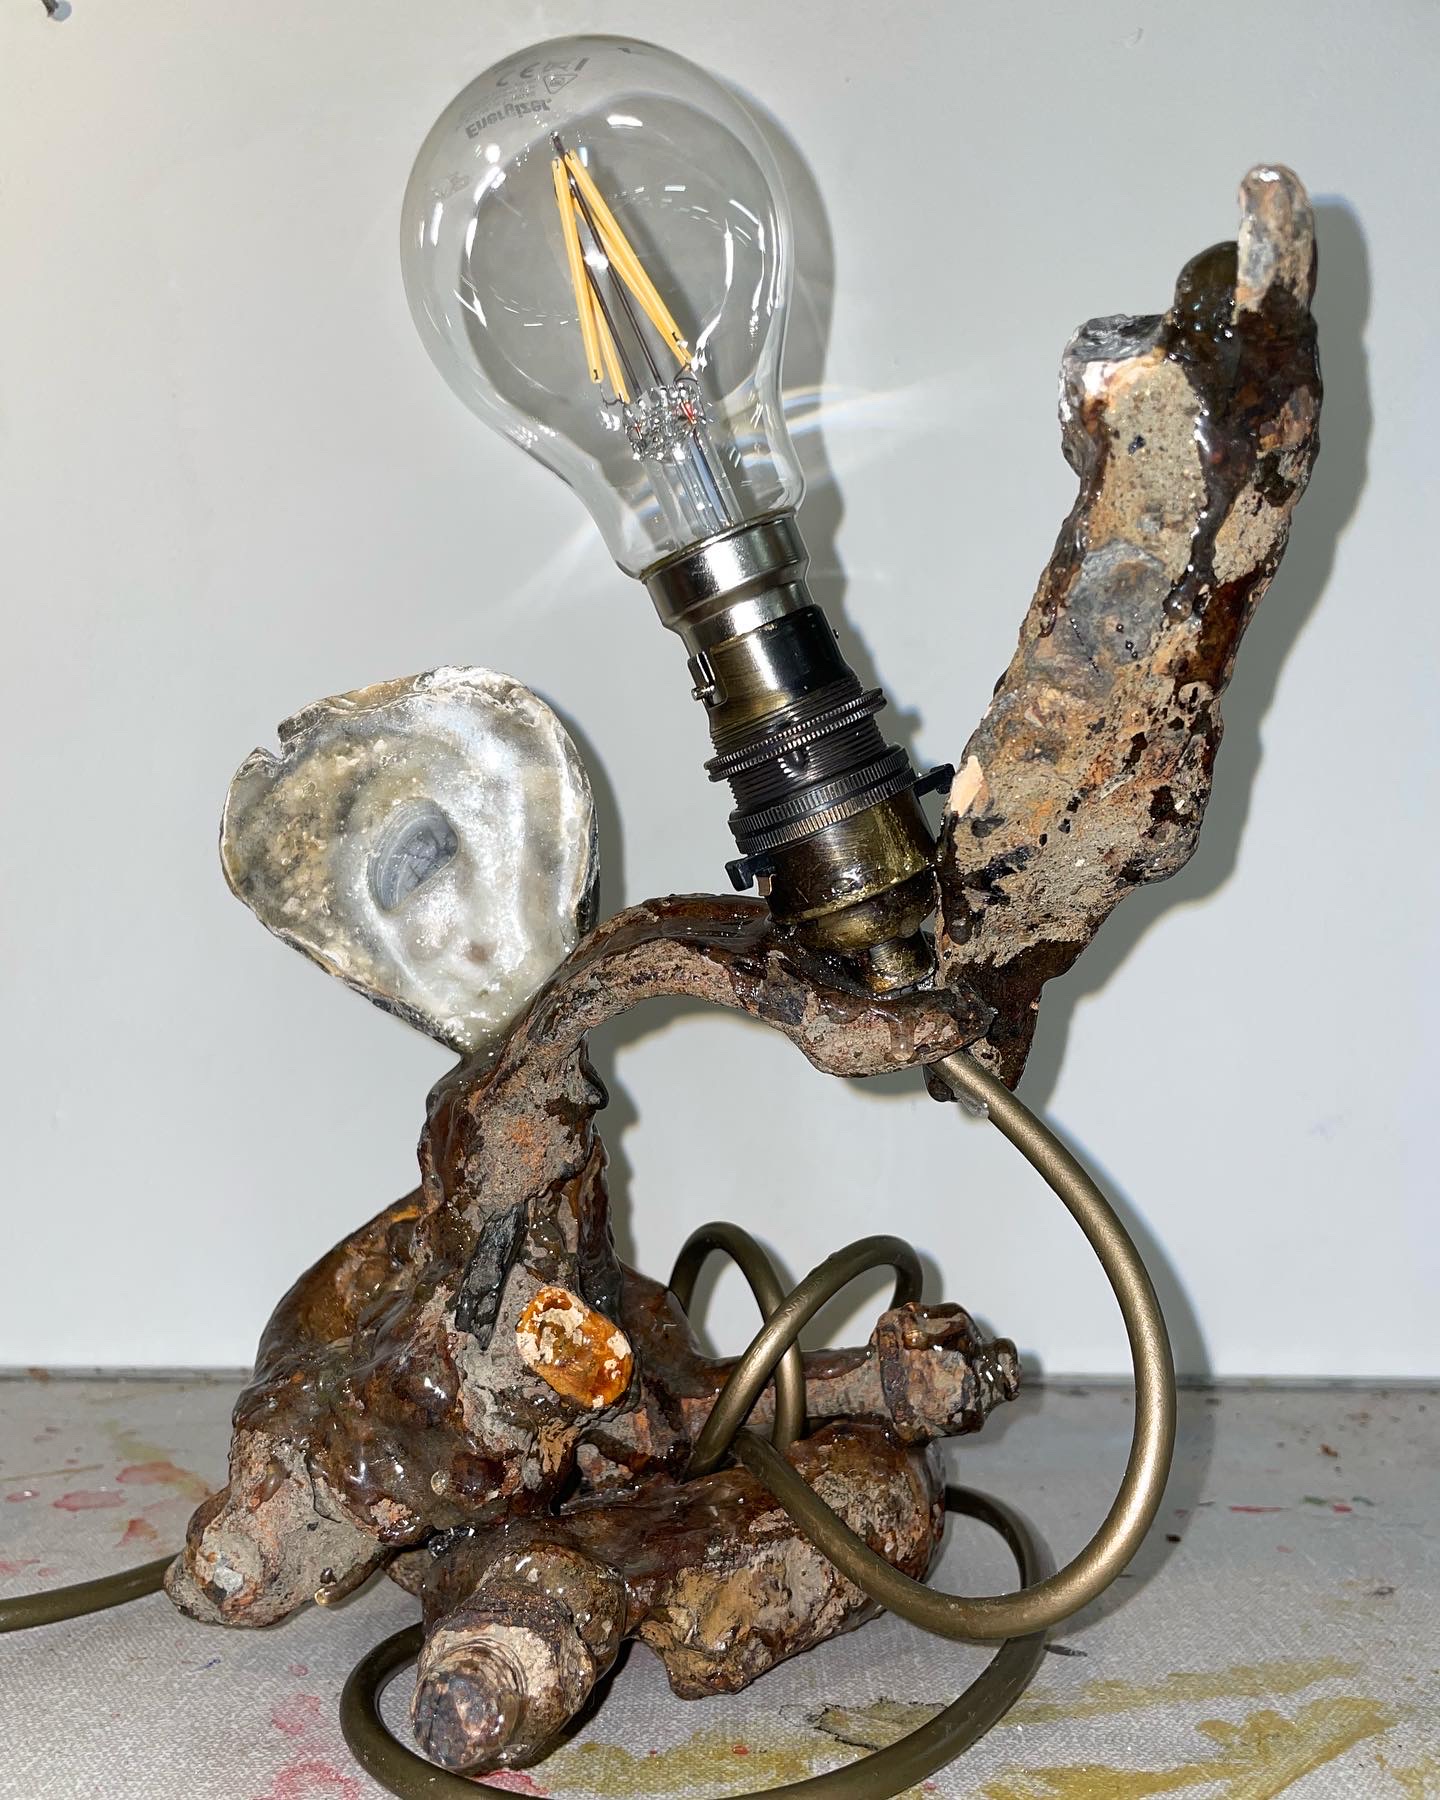 An assemblage light made out of various objects.